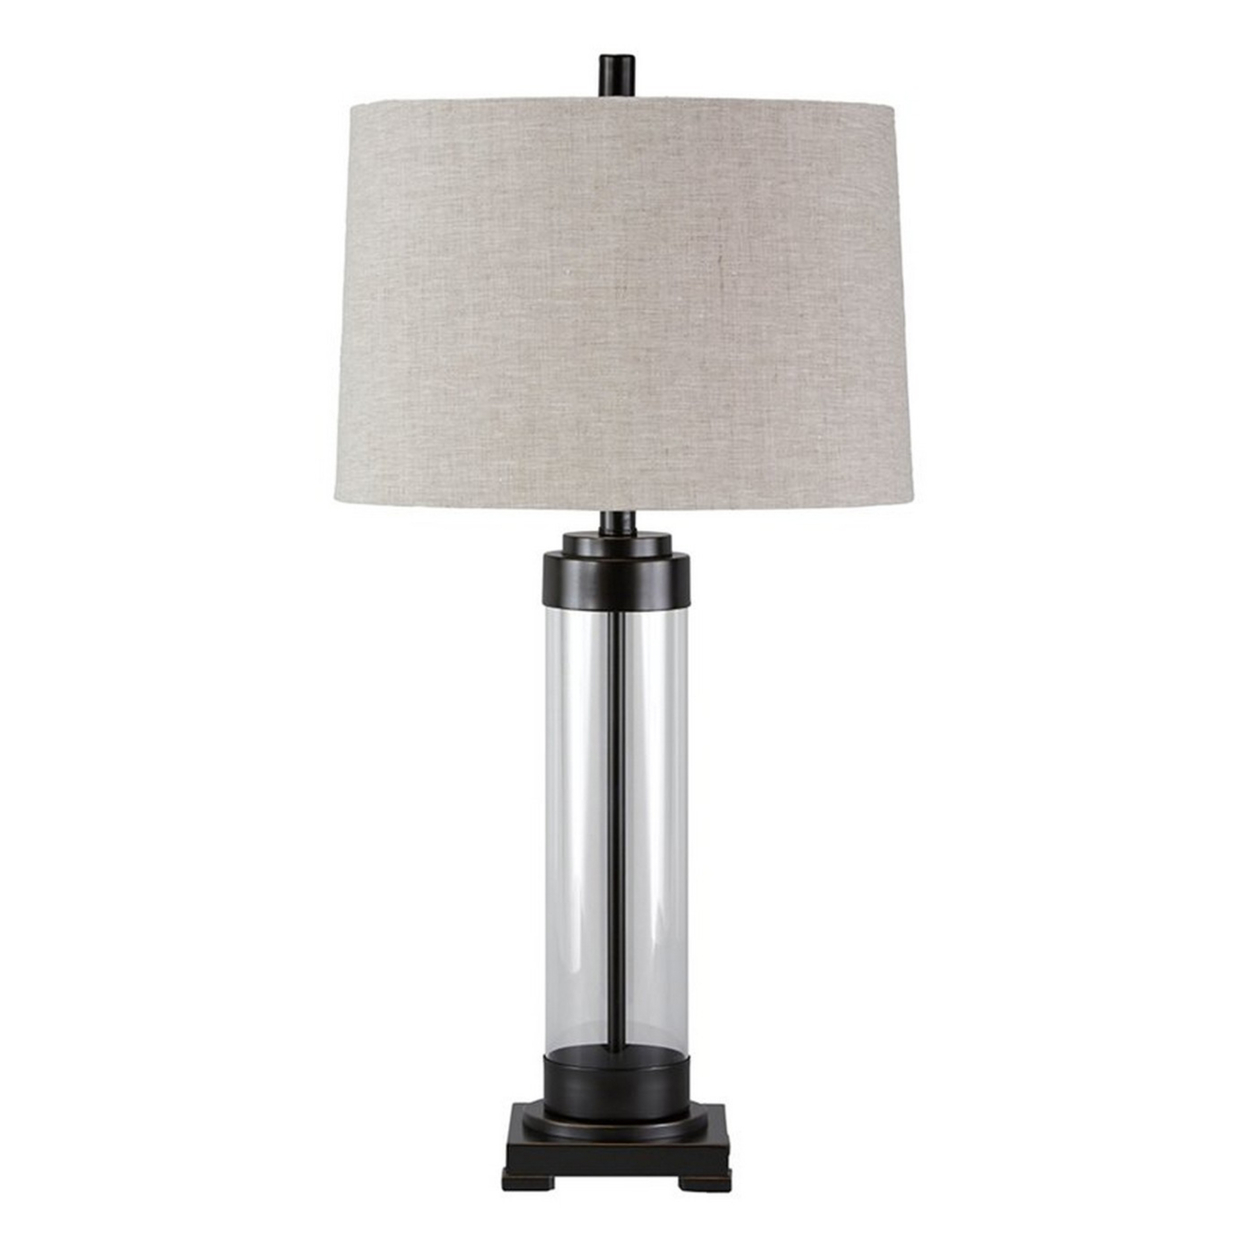 Glass And Metal Frame Table Lamp With Fabric Shade, Gray And Black- Saltoro Sherpi